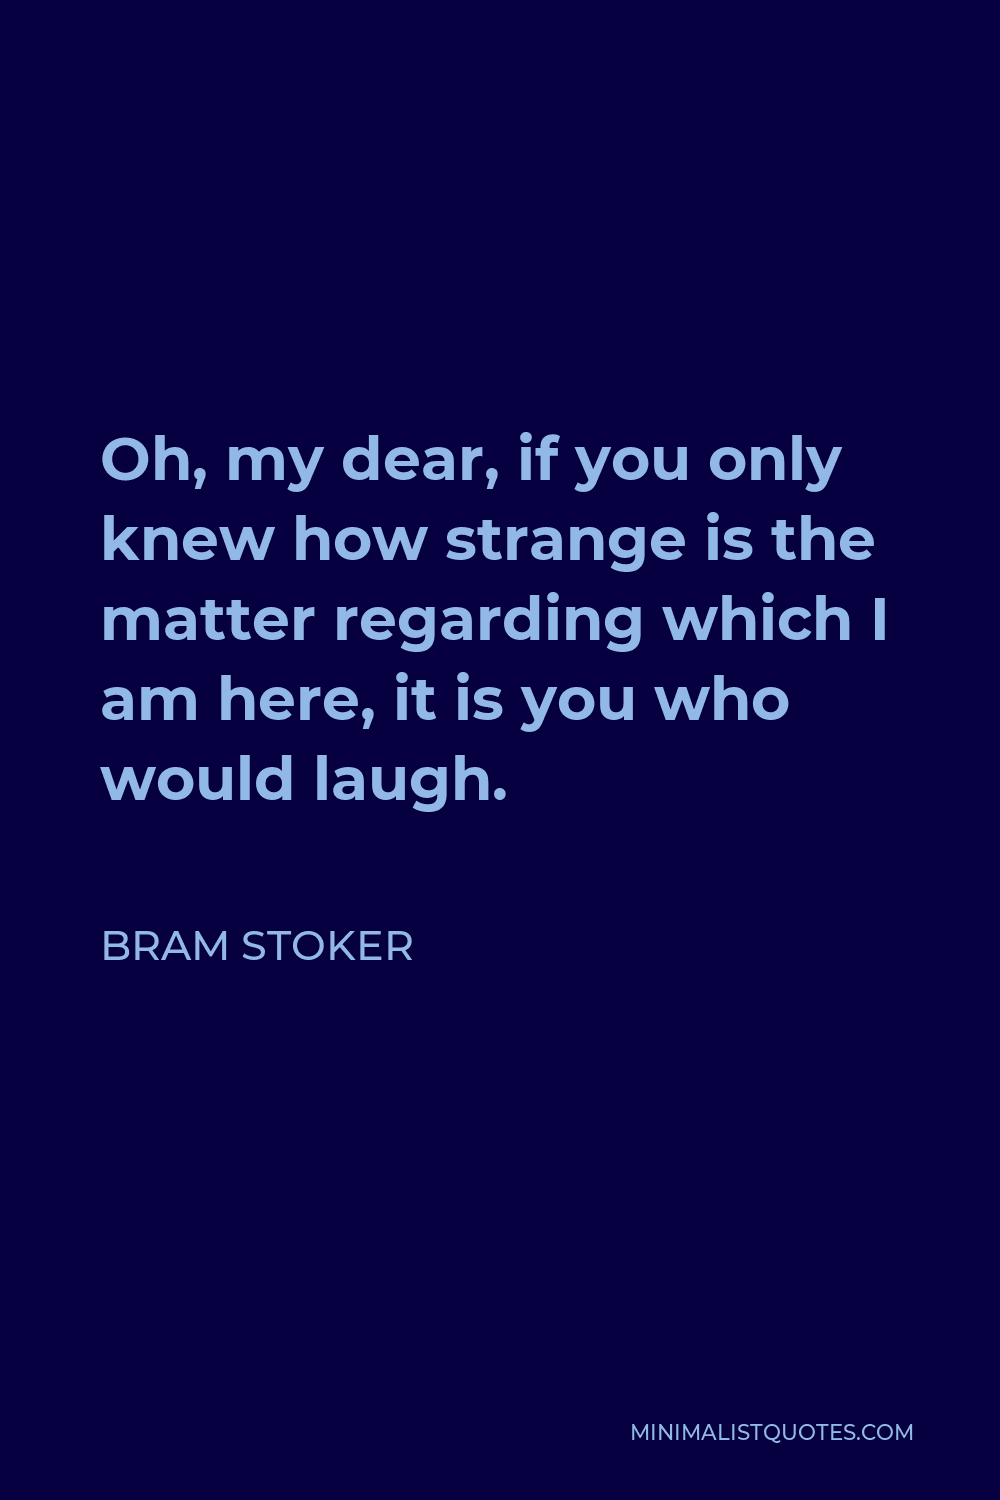 Bram Stoker Quote - Oh, my dear, if you only knew how strange is the matter regarding which I am here, it is you who would laugh.